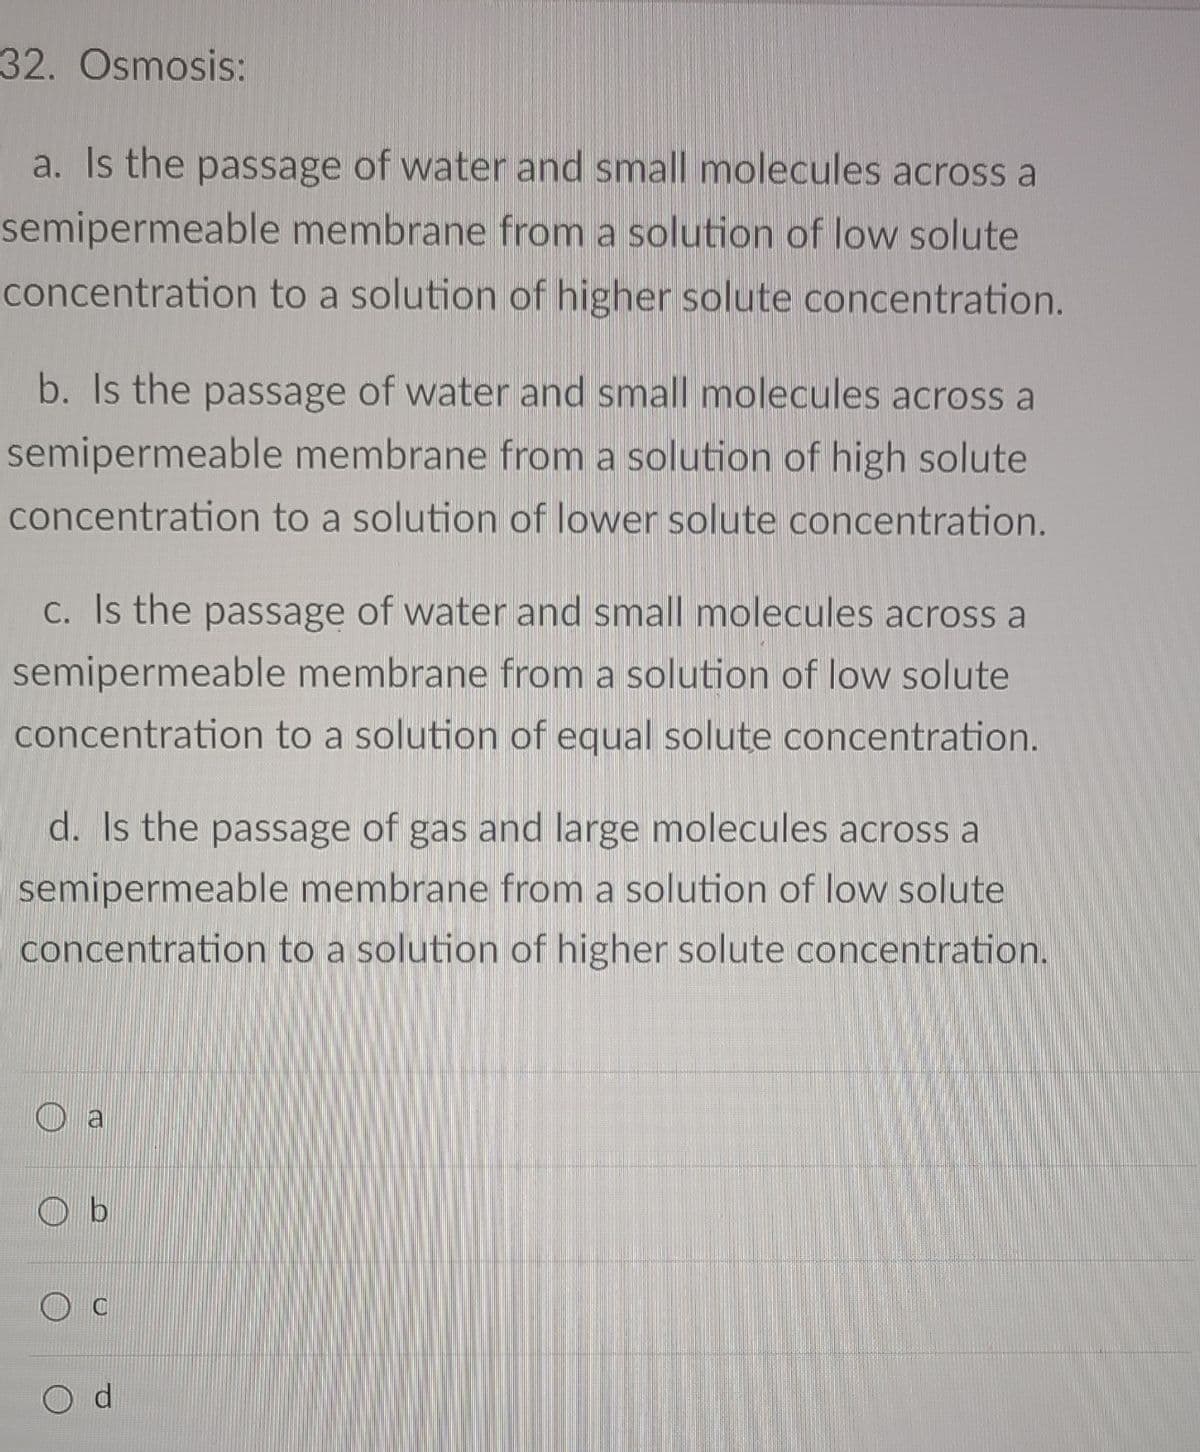 32. Osmosis:
a. Is the passage of water and small molecules across a
semipermeable membrane from a solution of low solute
concentration to a solution of higher solute concentration.
b. Is the passage of water and small molecules across a
semipermeable membrane from a solution of high solute
concentration to a solution of lower solute concentration.
C. Is the passage of water and small molecules across a
semipermeable membrane from a solution of low solute
concentration to a solution of equal solute concentration.
d. Is the passage of gas and large molecules across a
semipermeable membrane from a solution of low solute
concentration to a solution of higher solute concentration.
a
O b
